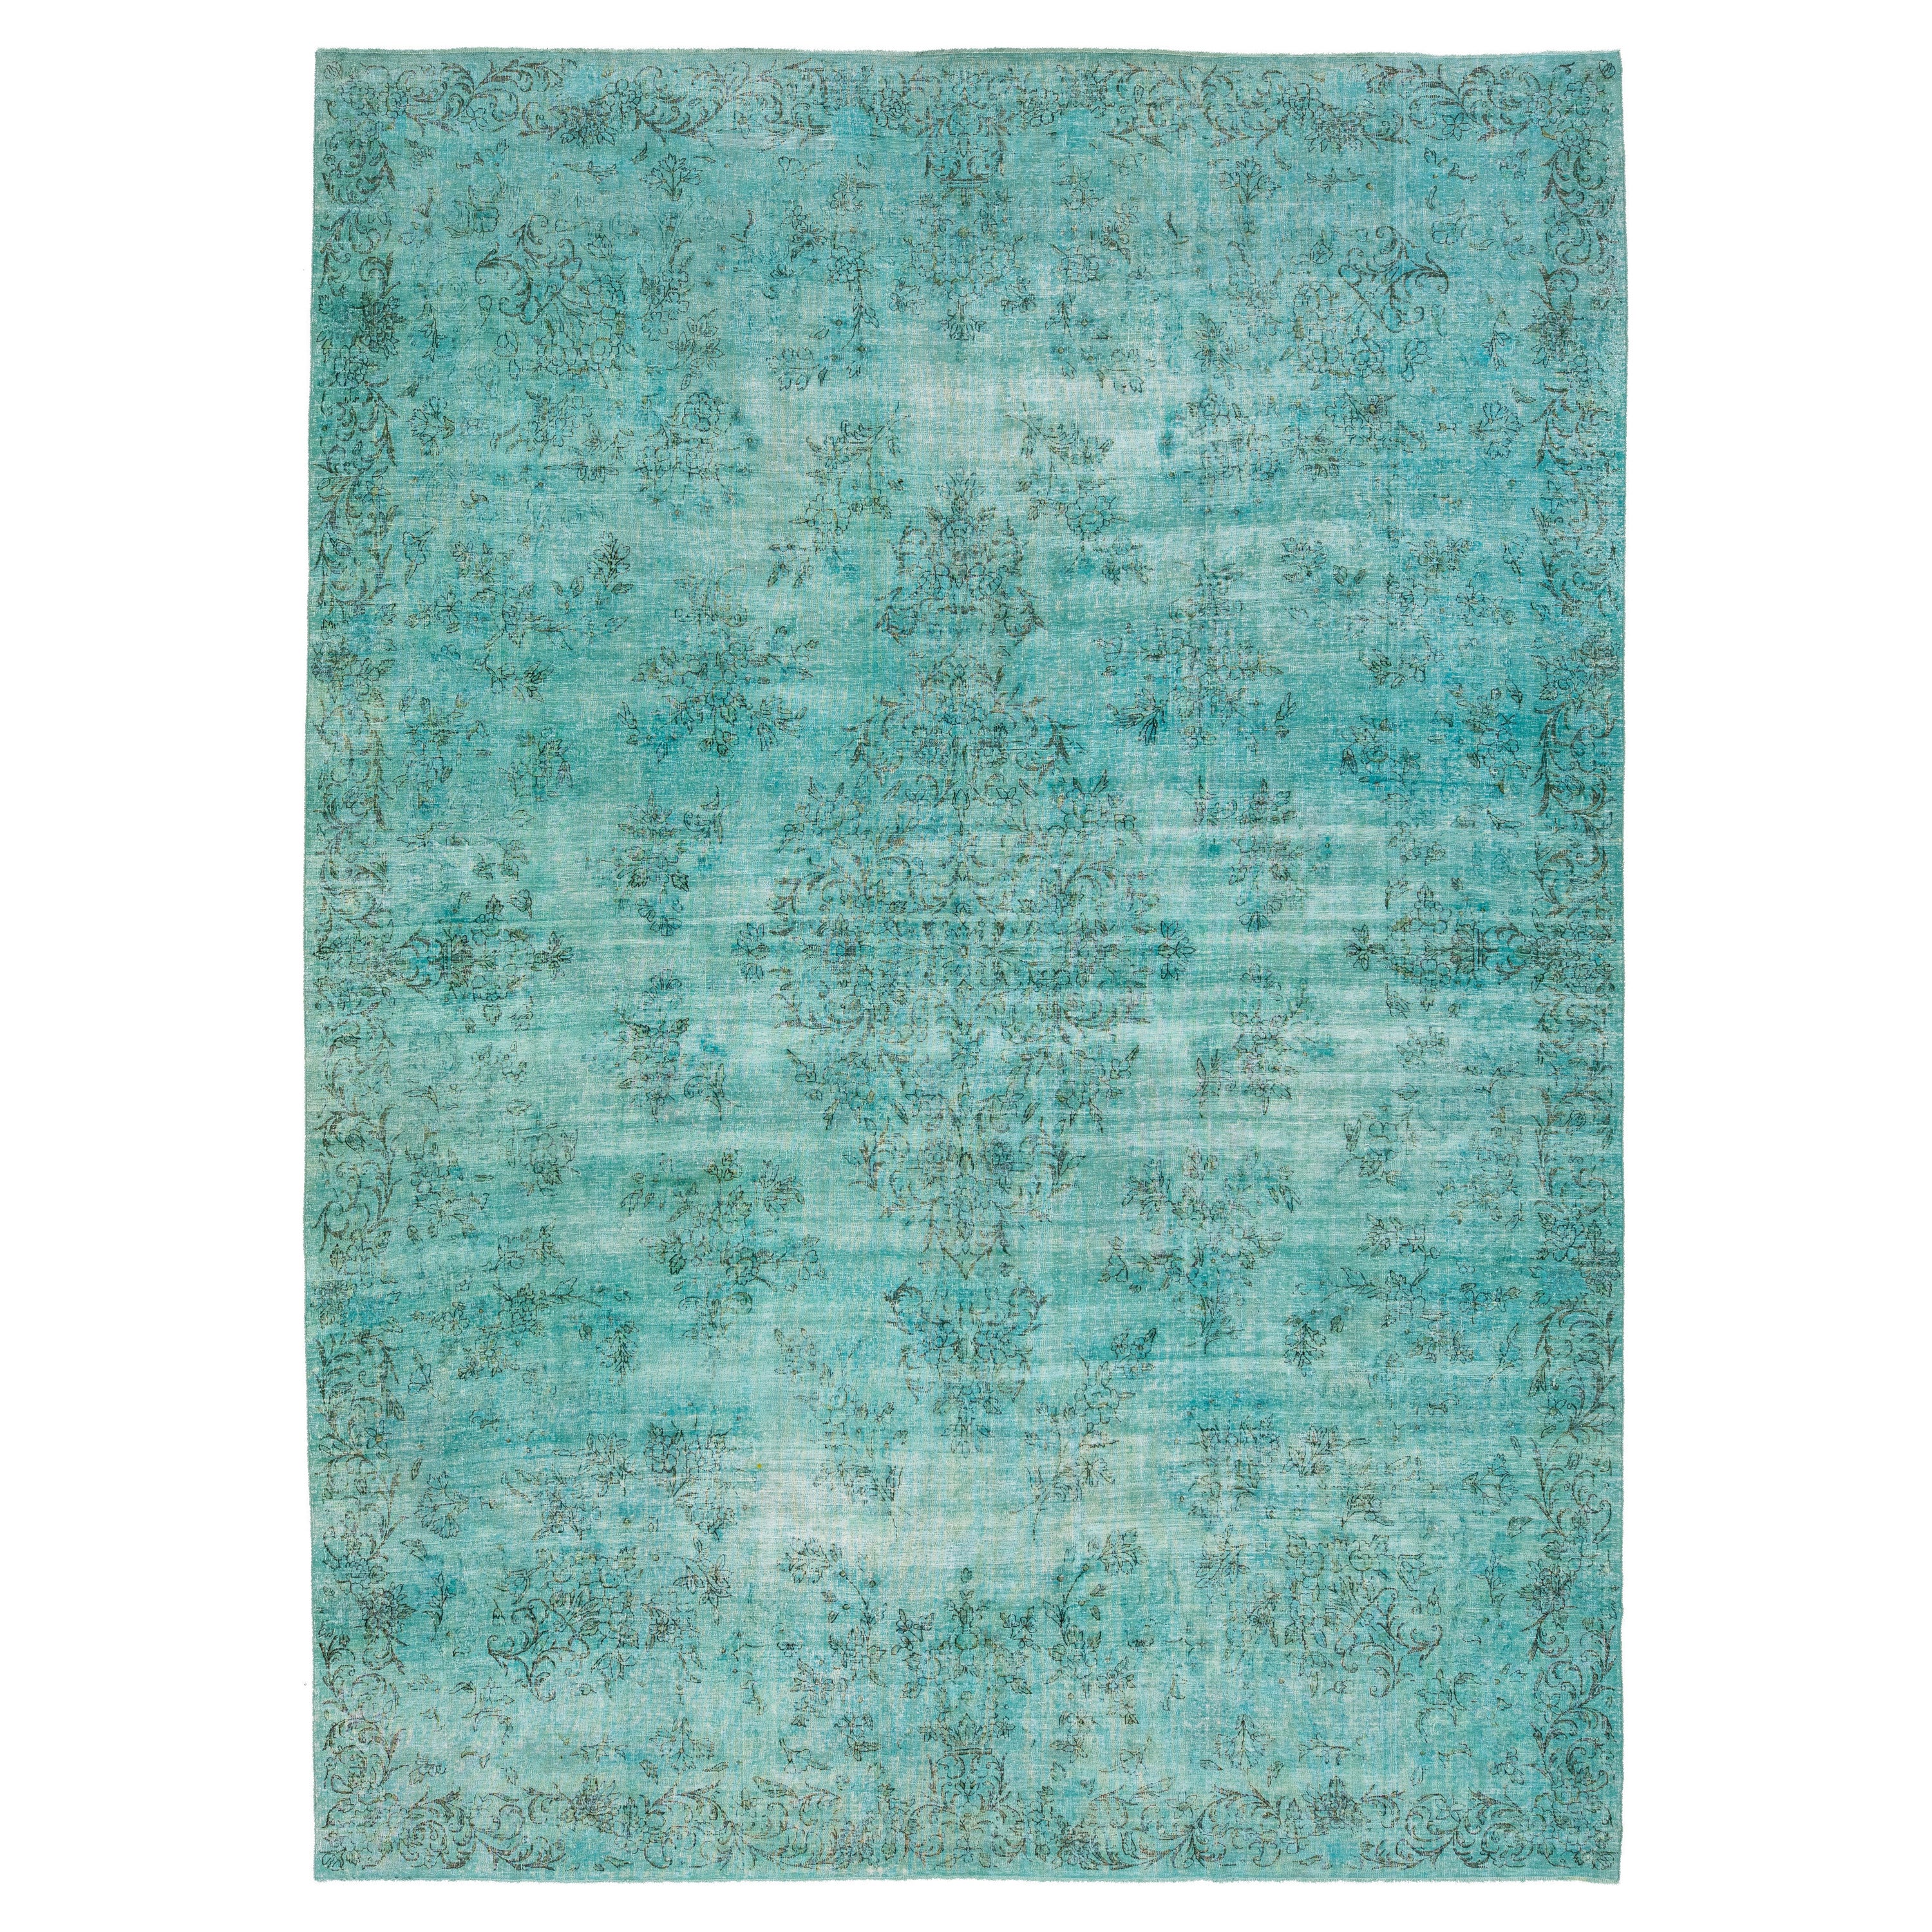 Allove Designed Antique Wool Rug Overdyed In Turquoise Color For Sale